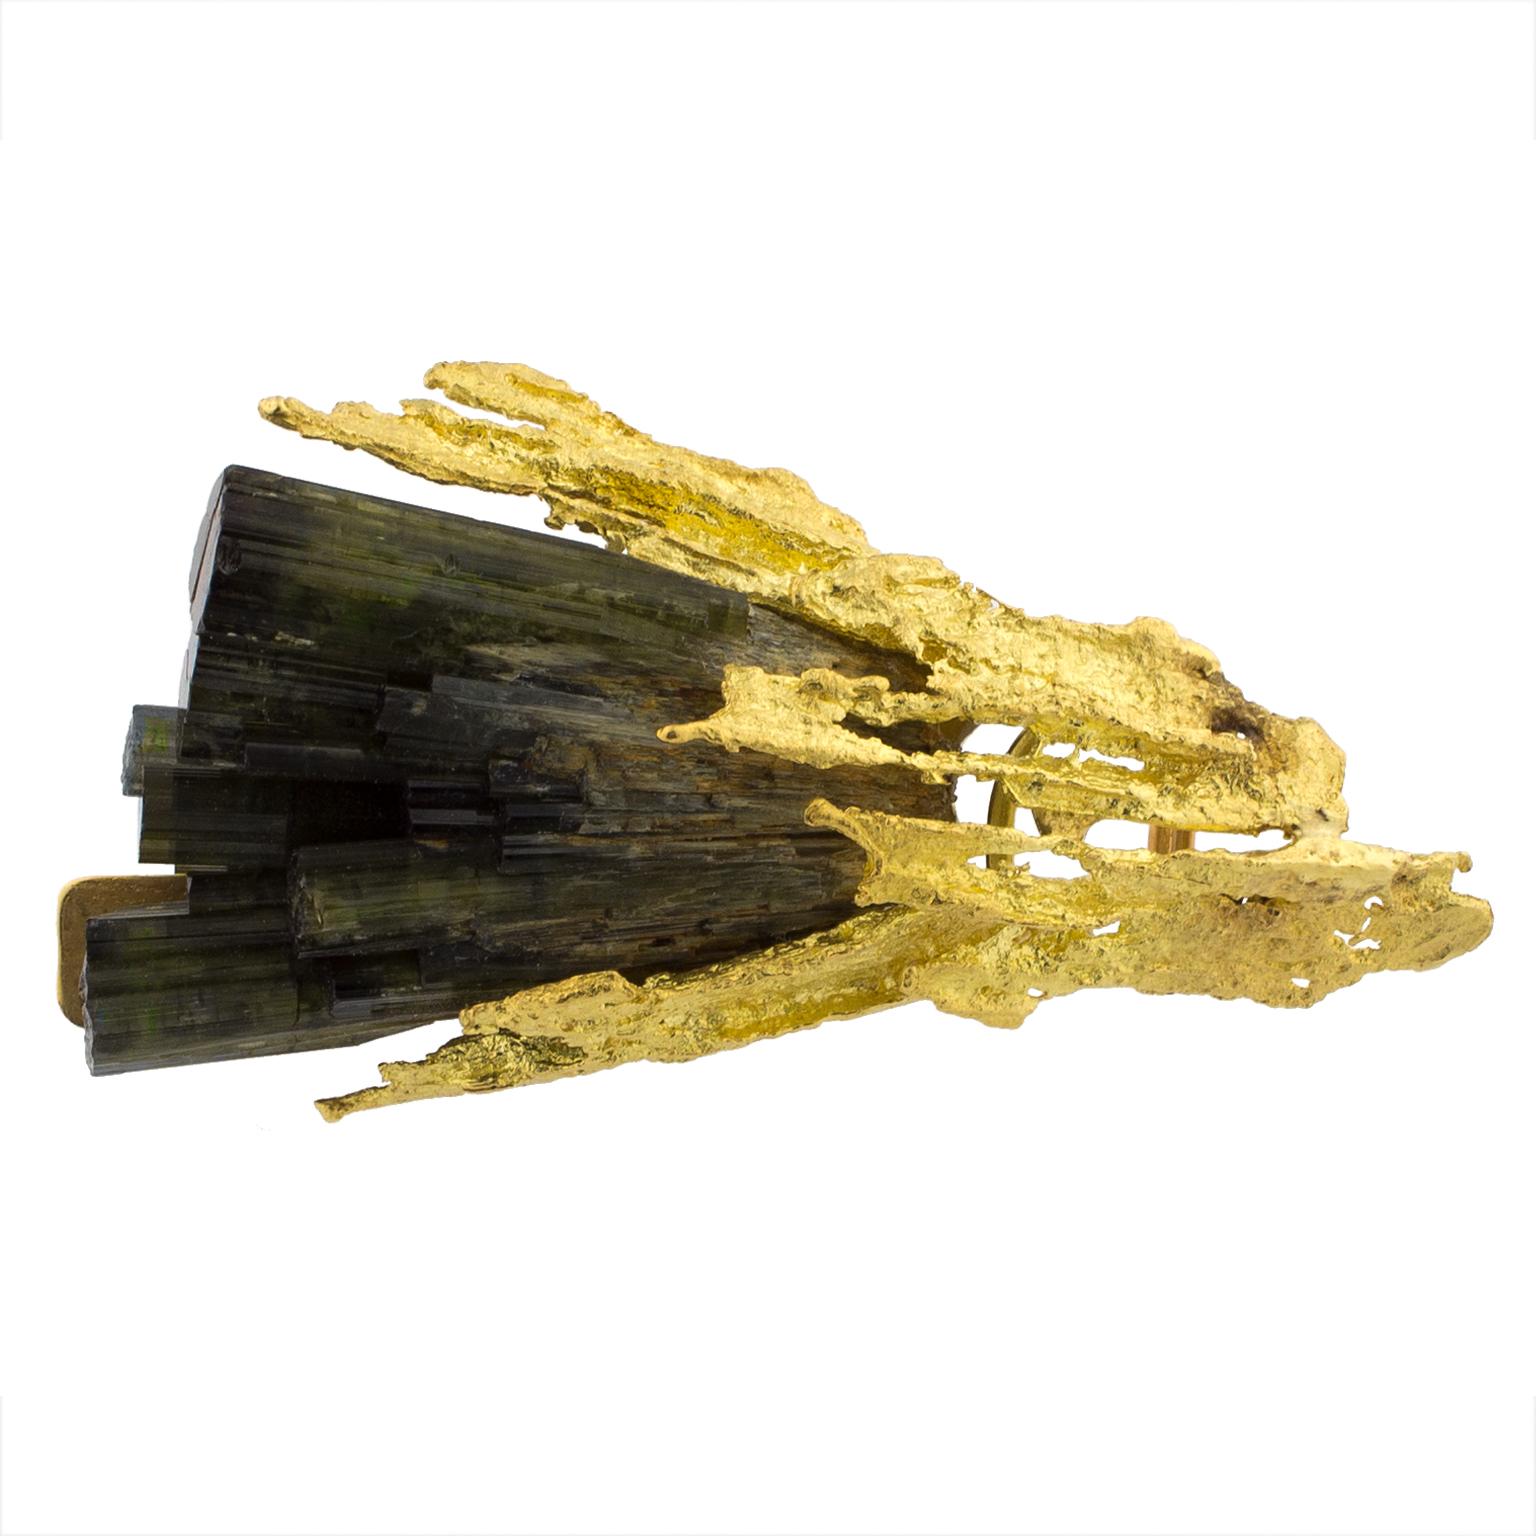 Suárez gold brooch with a green tourmaline in mineral form.
Length: 58mm (2.28 in)
Width: 32mm (1.26 in)